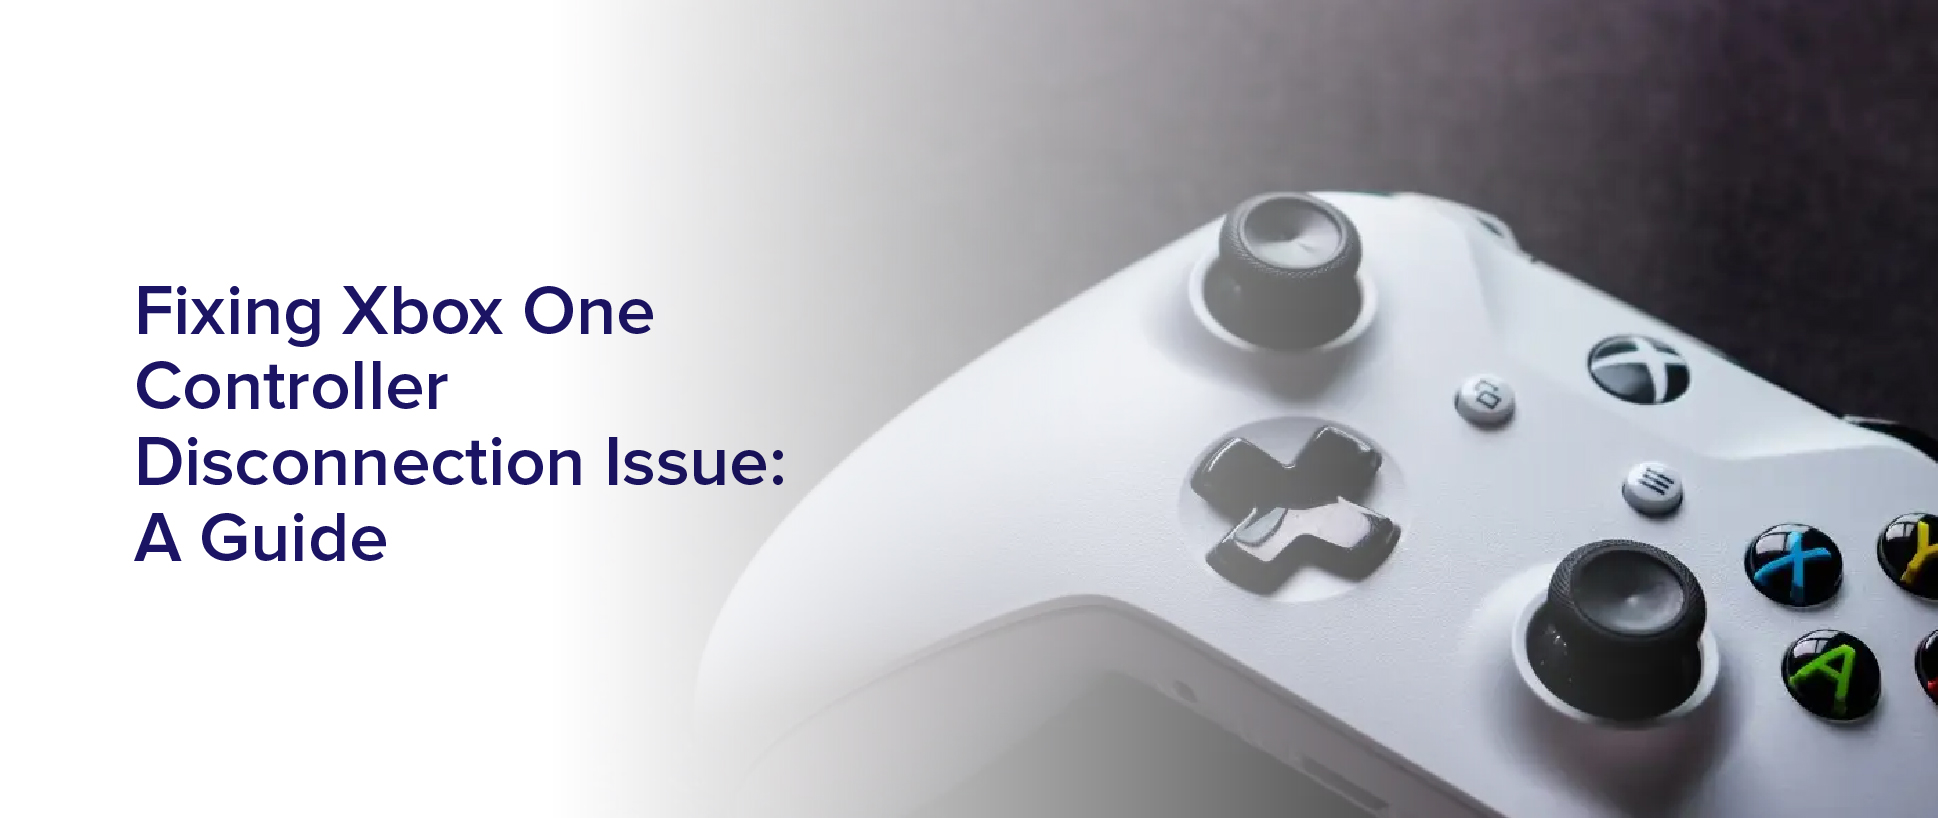 Fixing Xbox One Controller Disconnection Issue